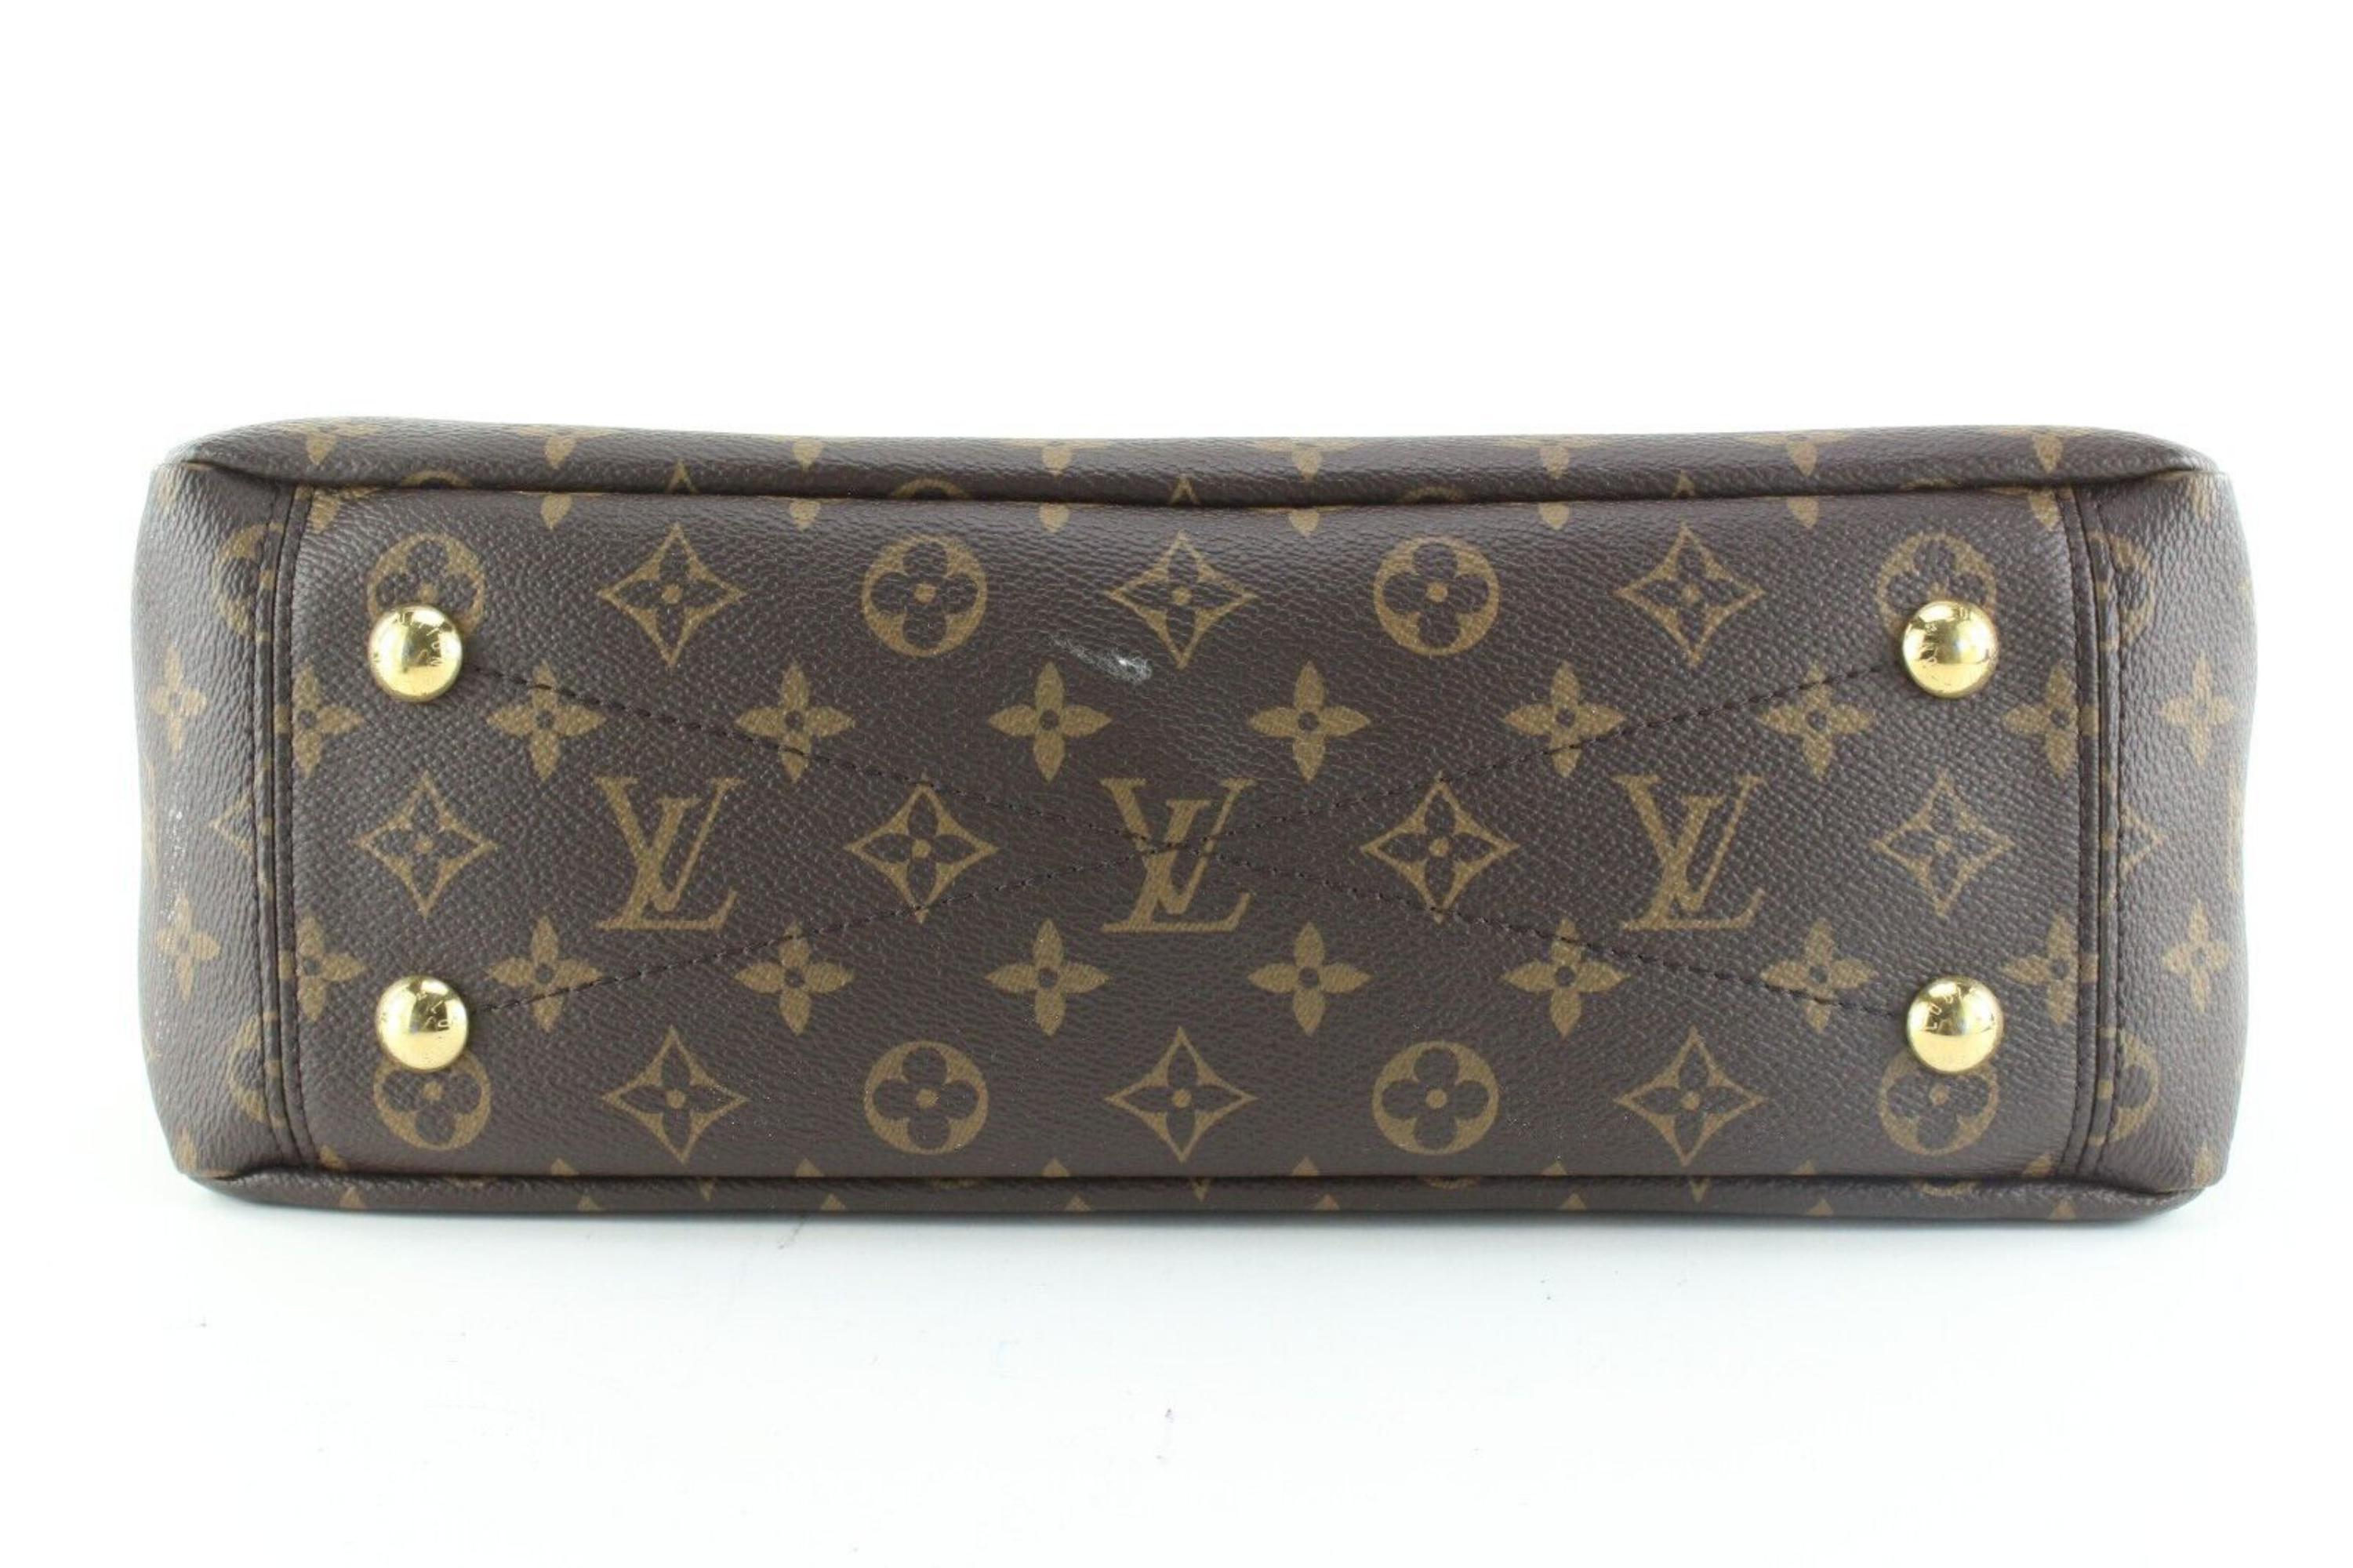 Louis Vuitton Monogram Pallas Shopper Dune Leather Chain Bag 4LK0502 In Good Condition For Sale In Dix hills, NY